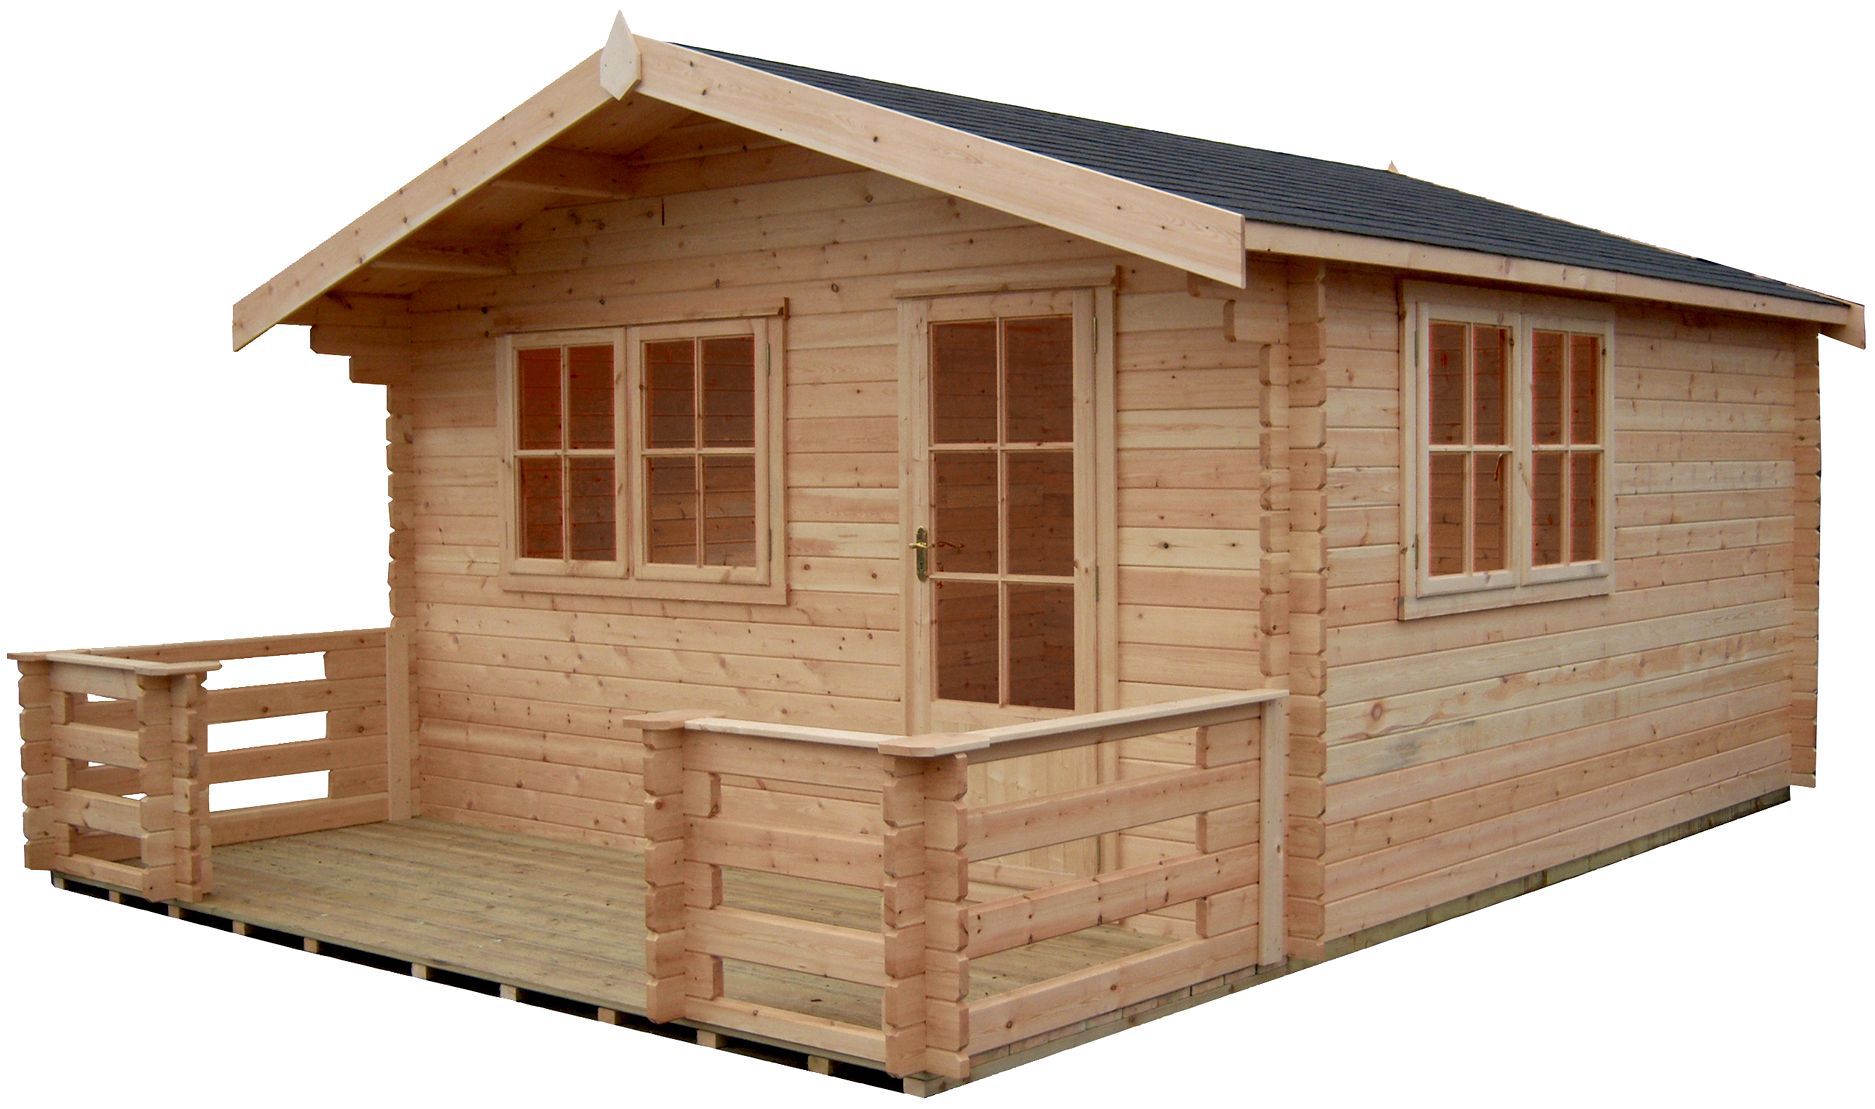 Shire Kinver 12x14 ft & 4 windows Apex Wooden Cabin - Assembly service included